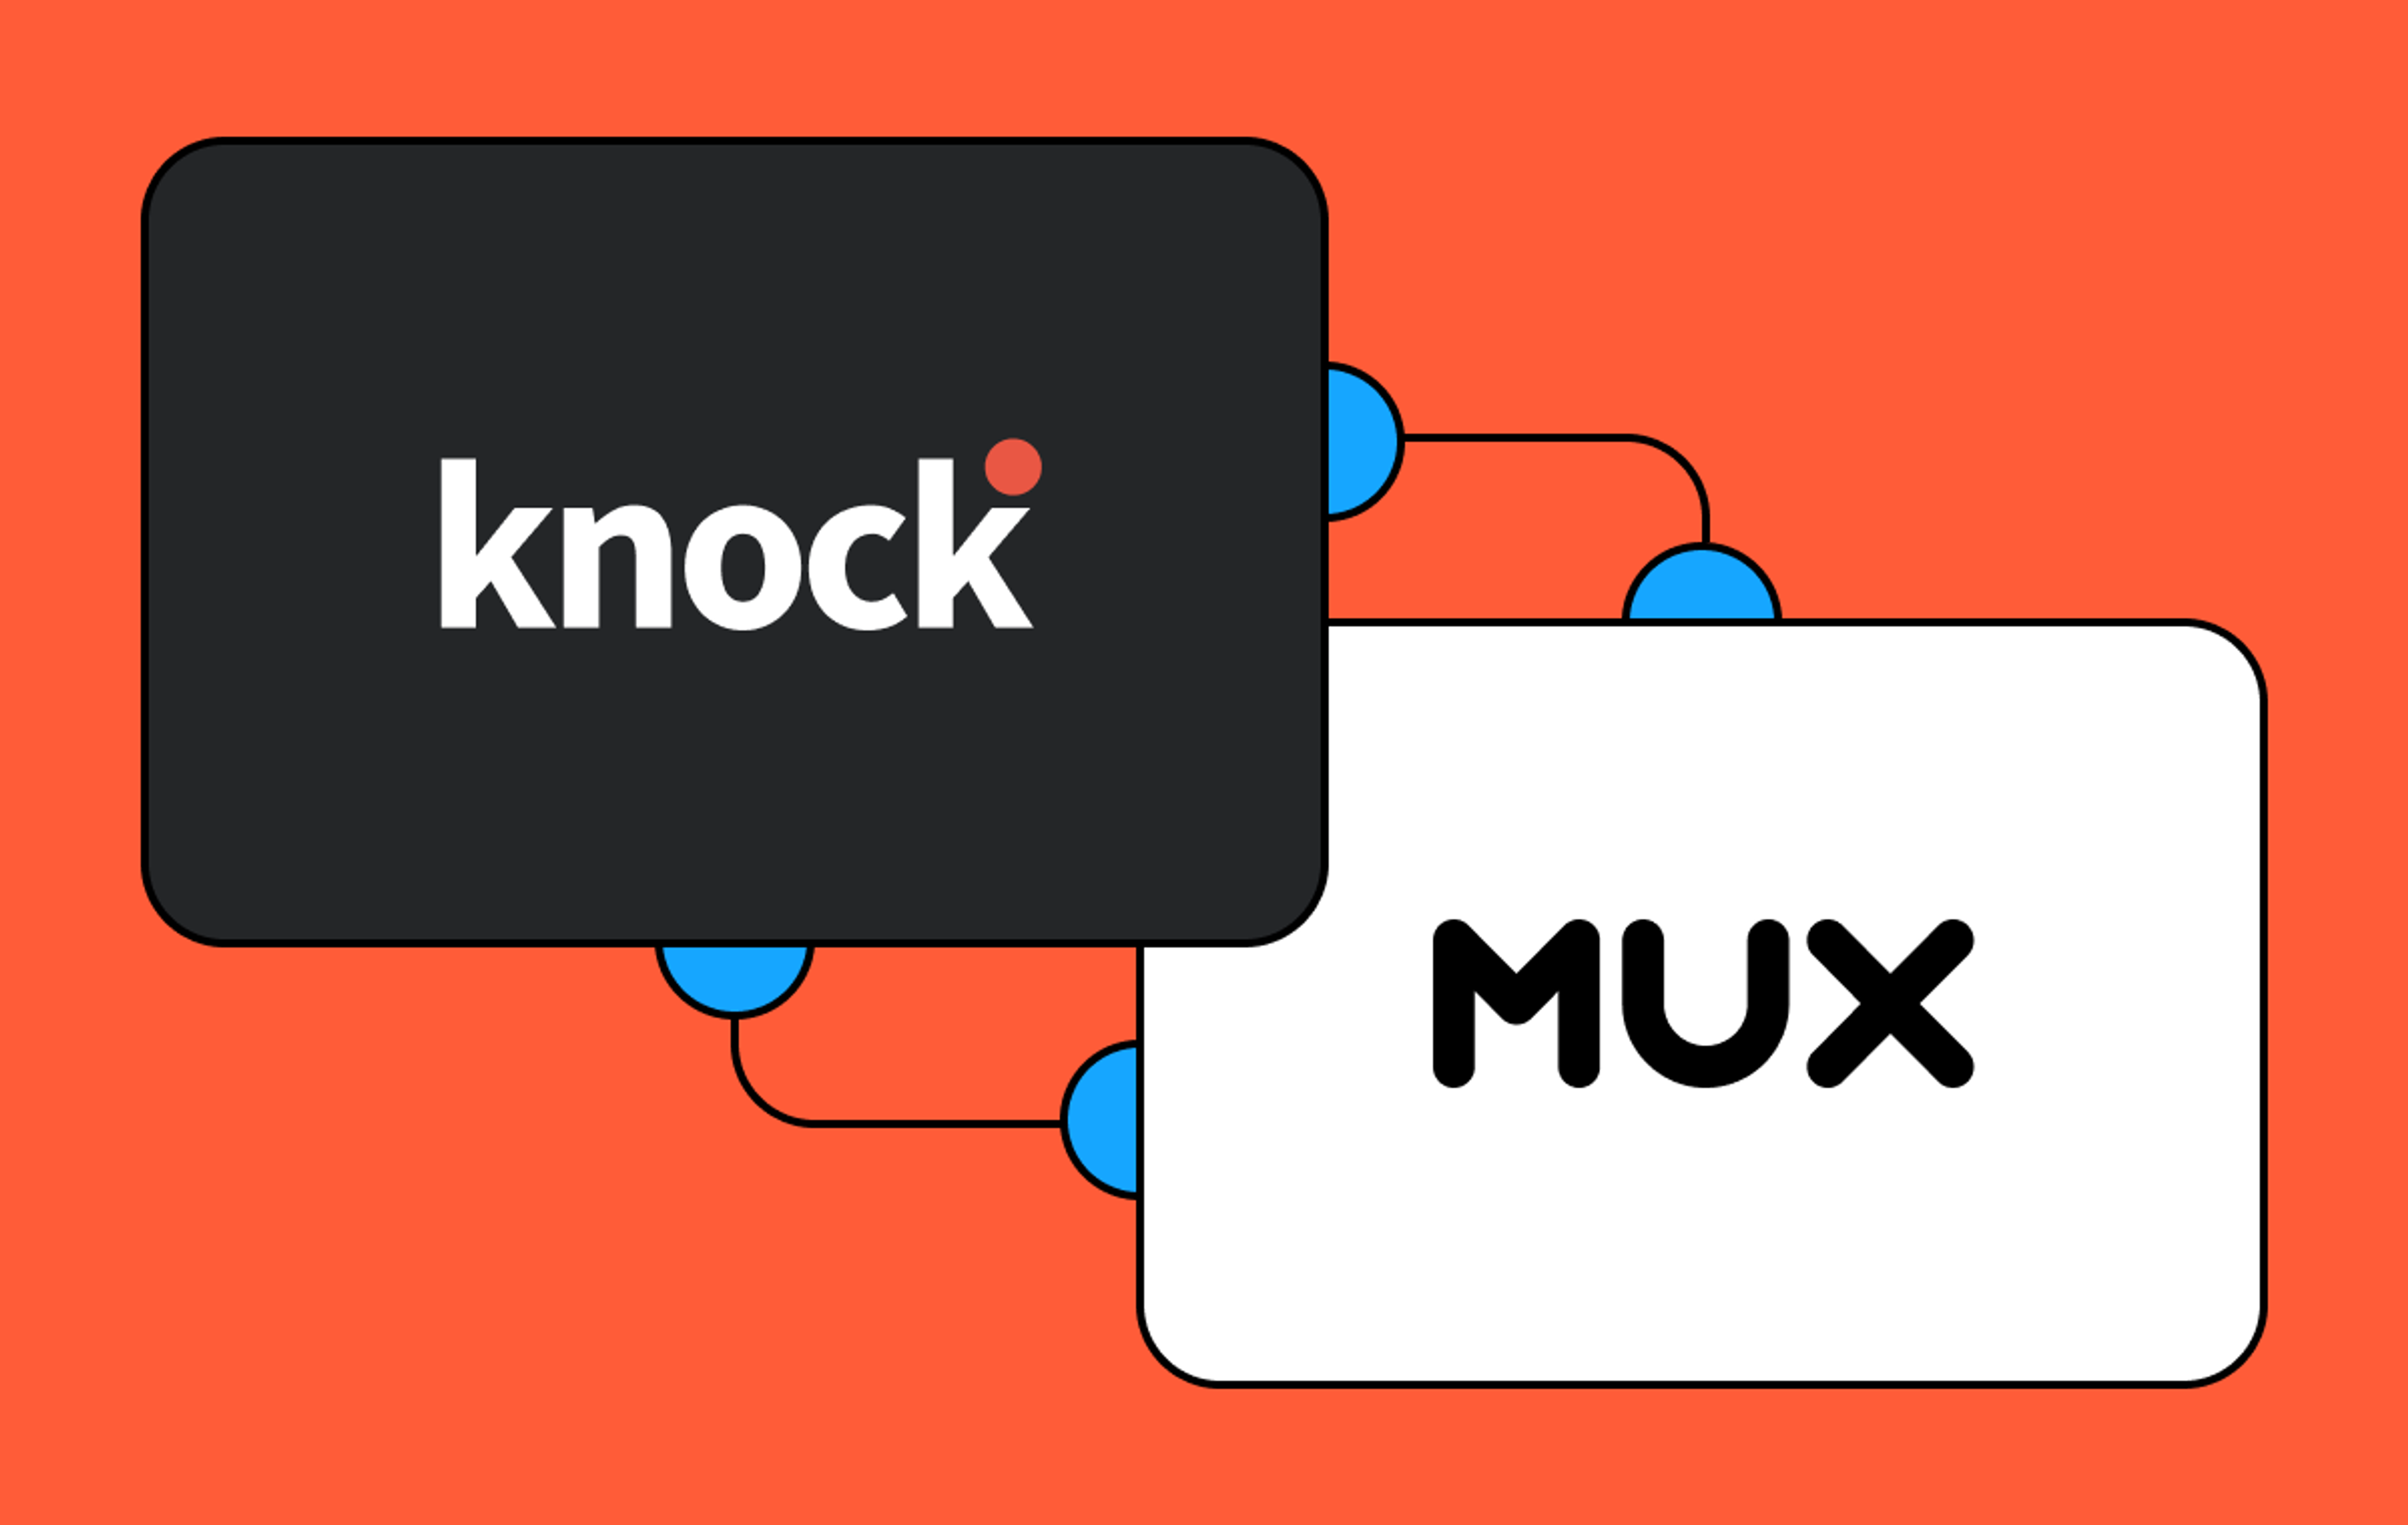 The Knock logo and the Mux logo in two rounded boxes connected by lines on a red-organge background